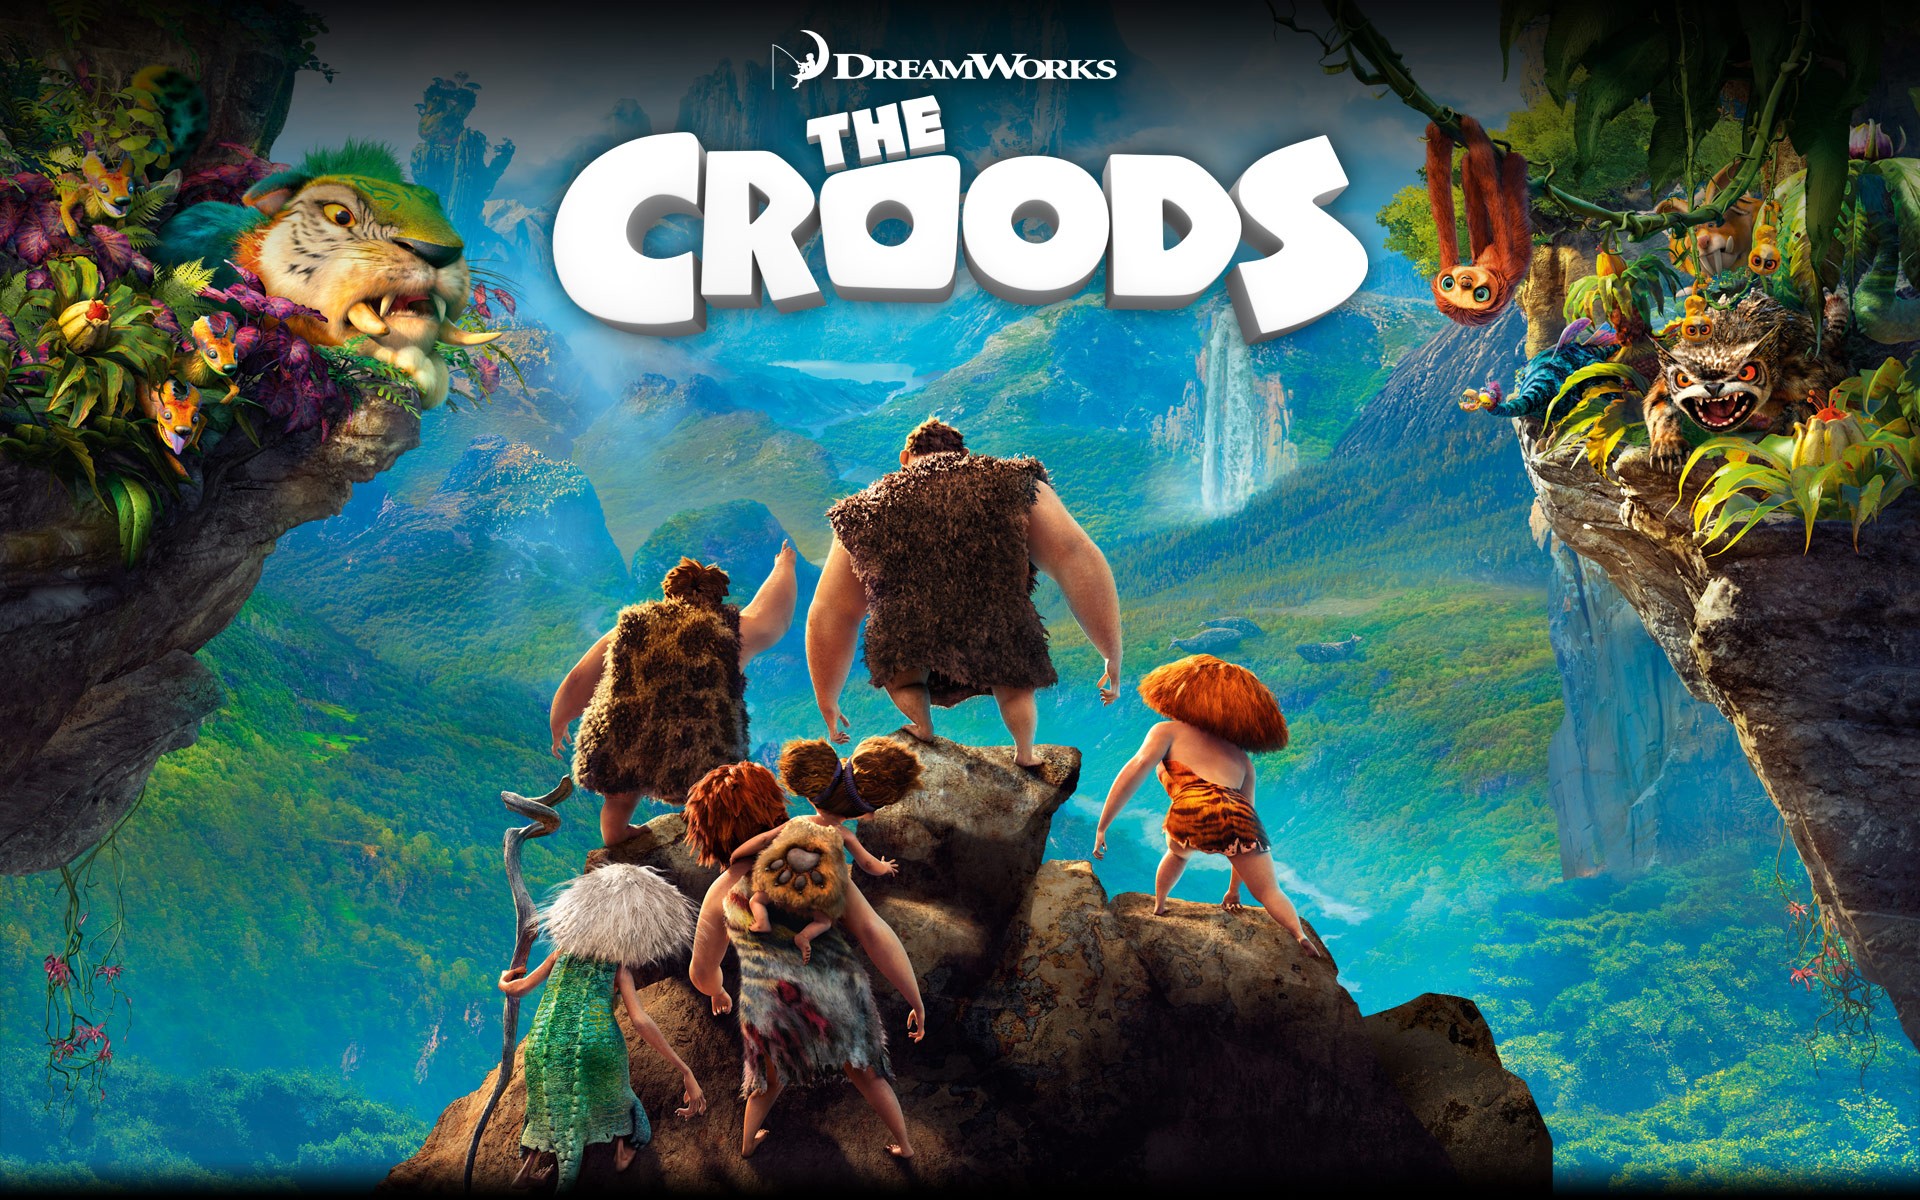 the, Croods Wallpaper